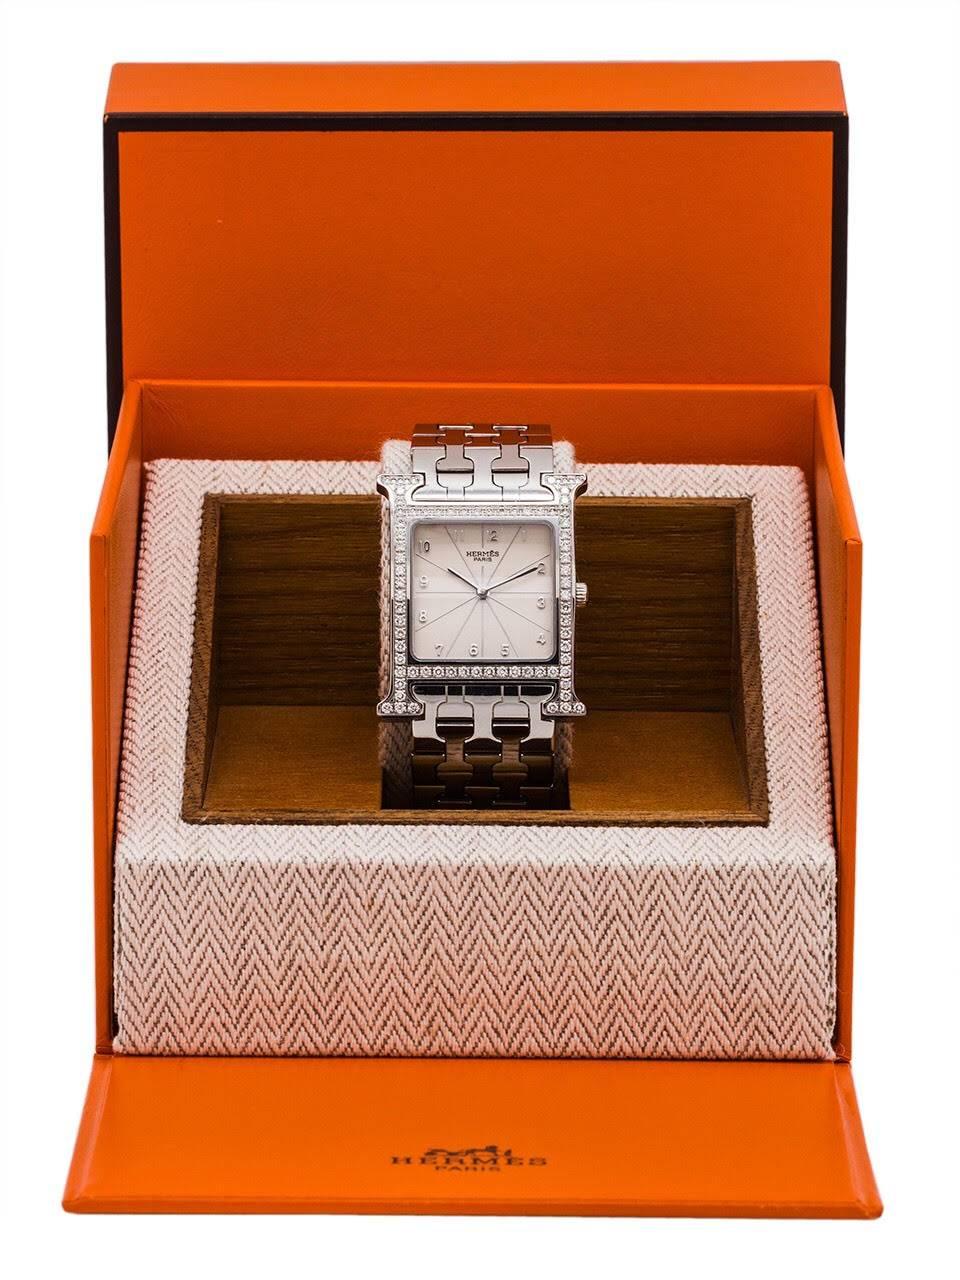 Stunning 26mm x 35mm Hermes Heure H diamond and stainless steel watch with Swiss quartz movement. Classic Hermes design, with sleek 20mm H link staineless steel bracelet with double deployment clasp, which fits up to a 6.5 inch wrist. Comes complete